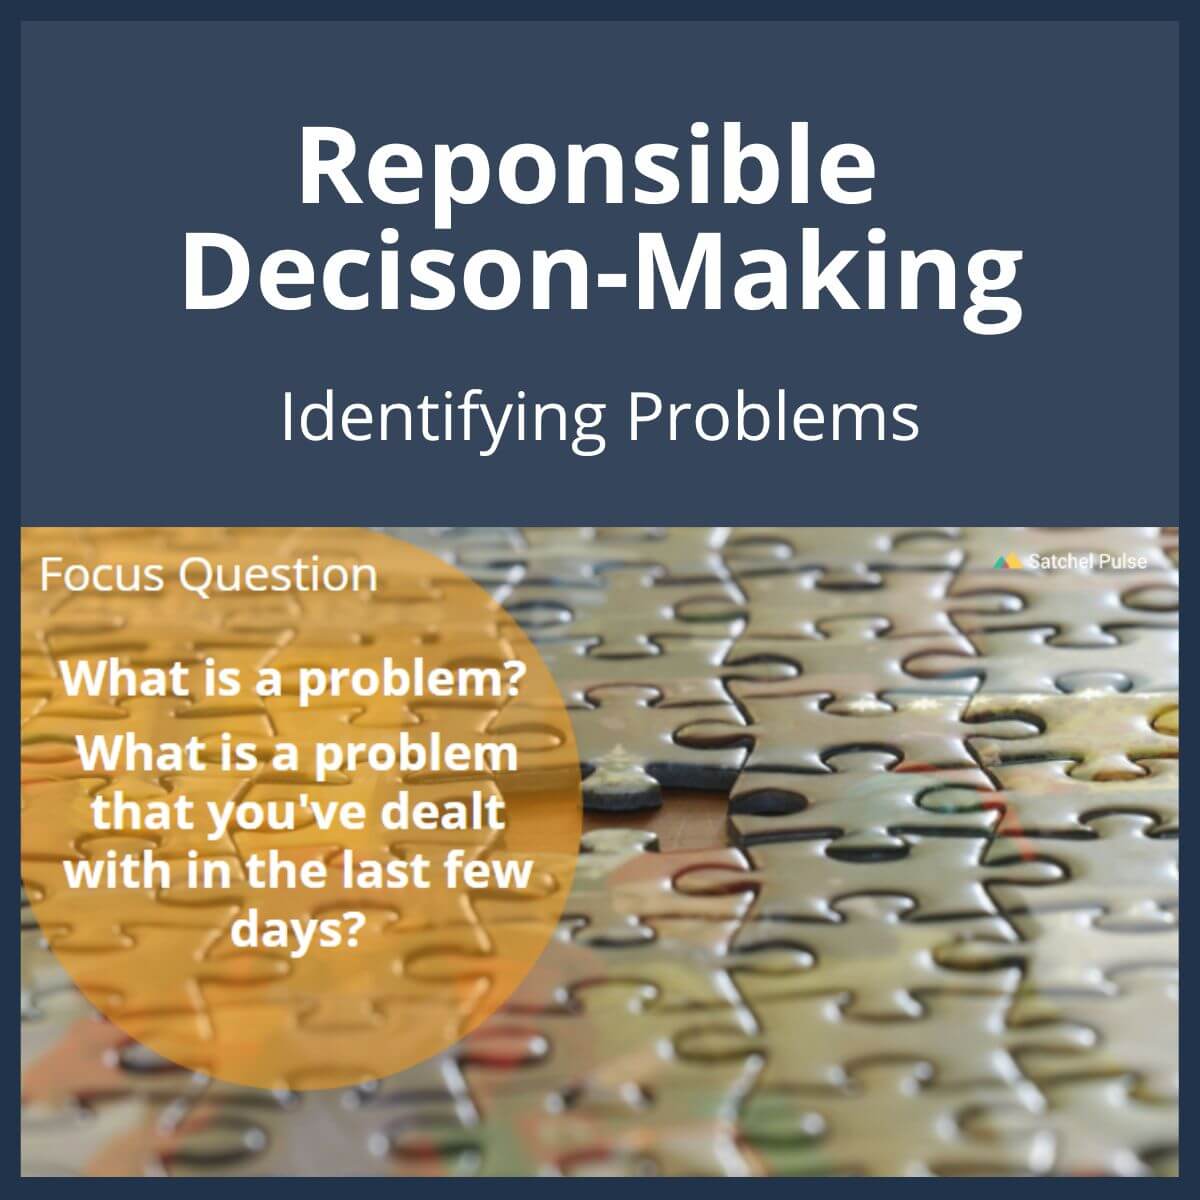 SEL Lesson focusing on Identifying Problems to use in your classroom as one of your SEL activities for Responsible Decision-Making